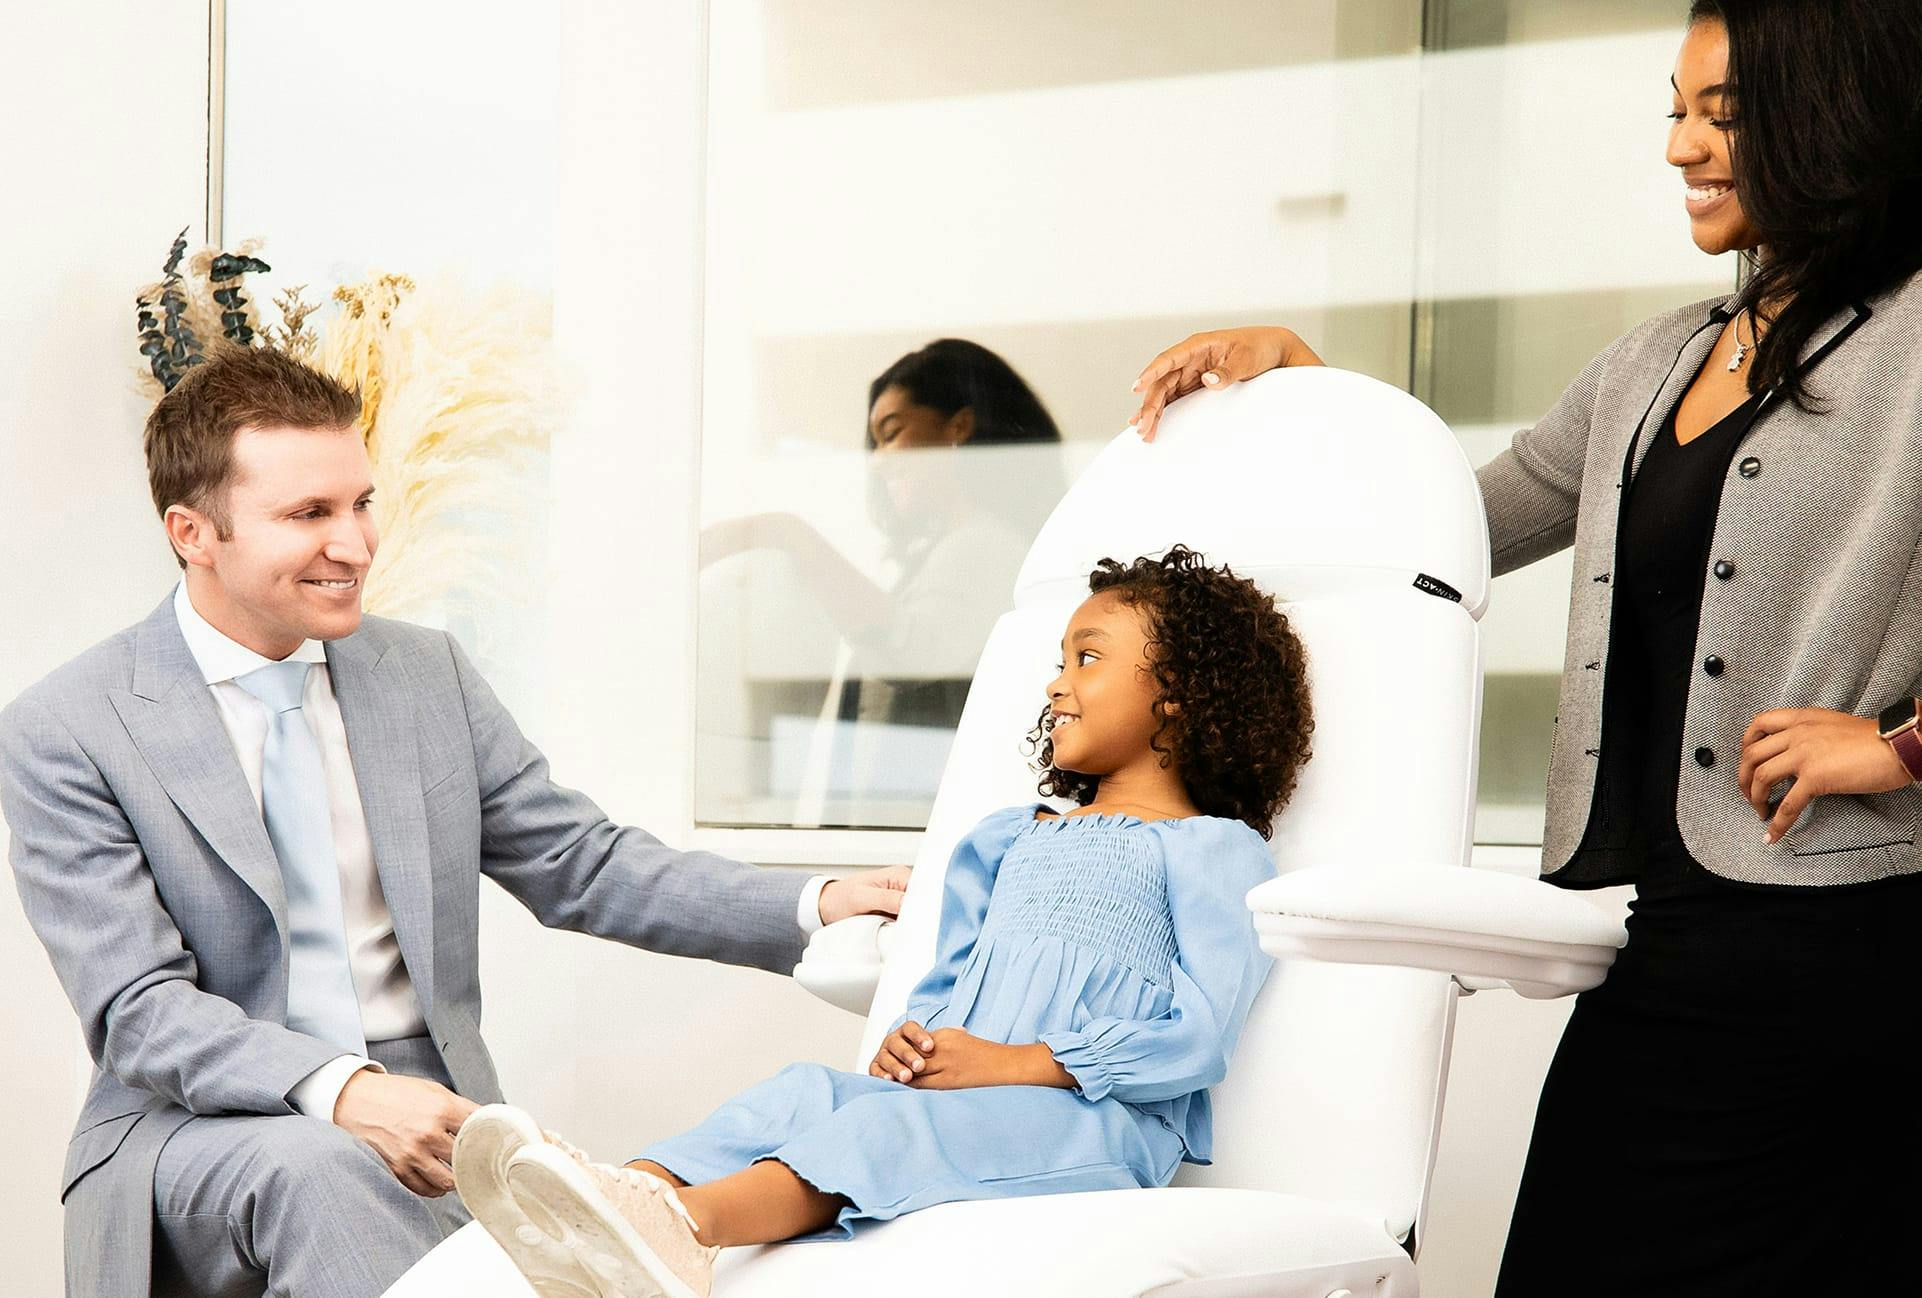 Doctor talking to a child